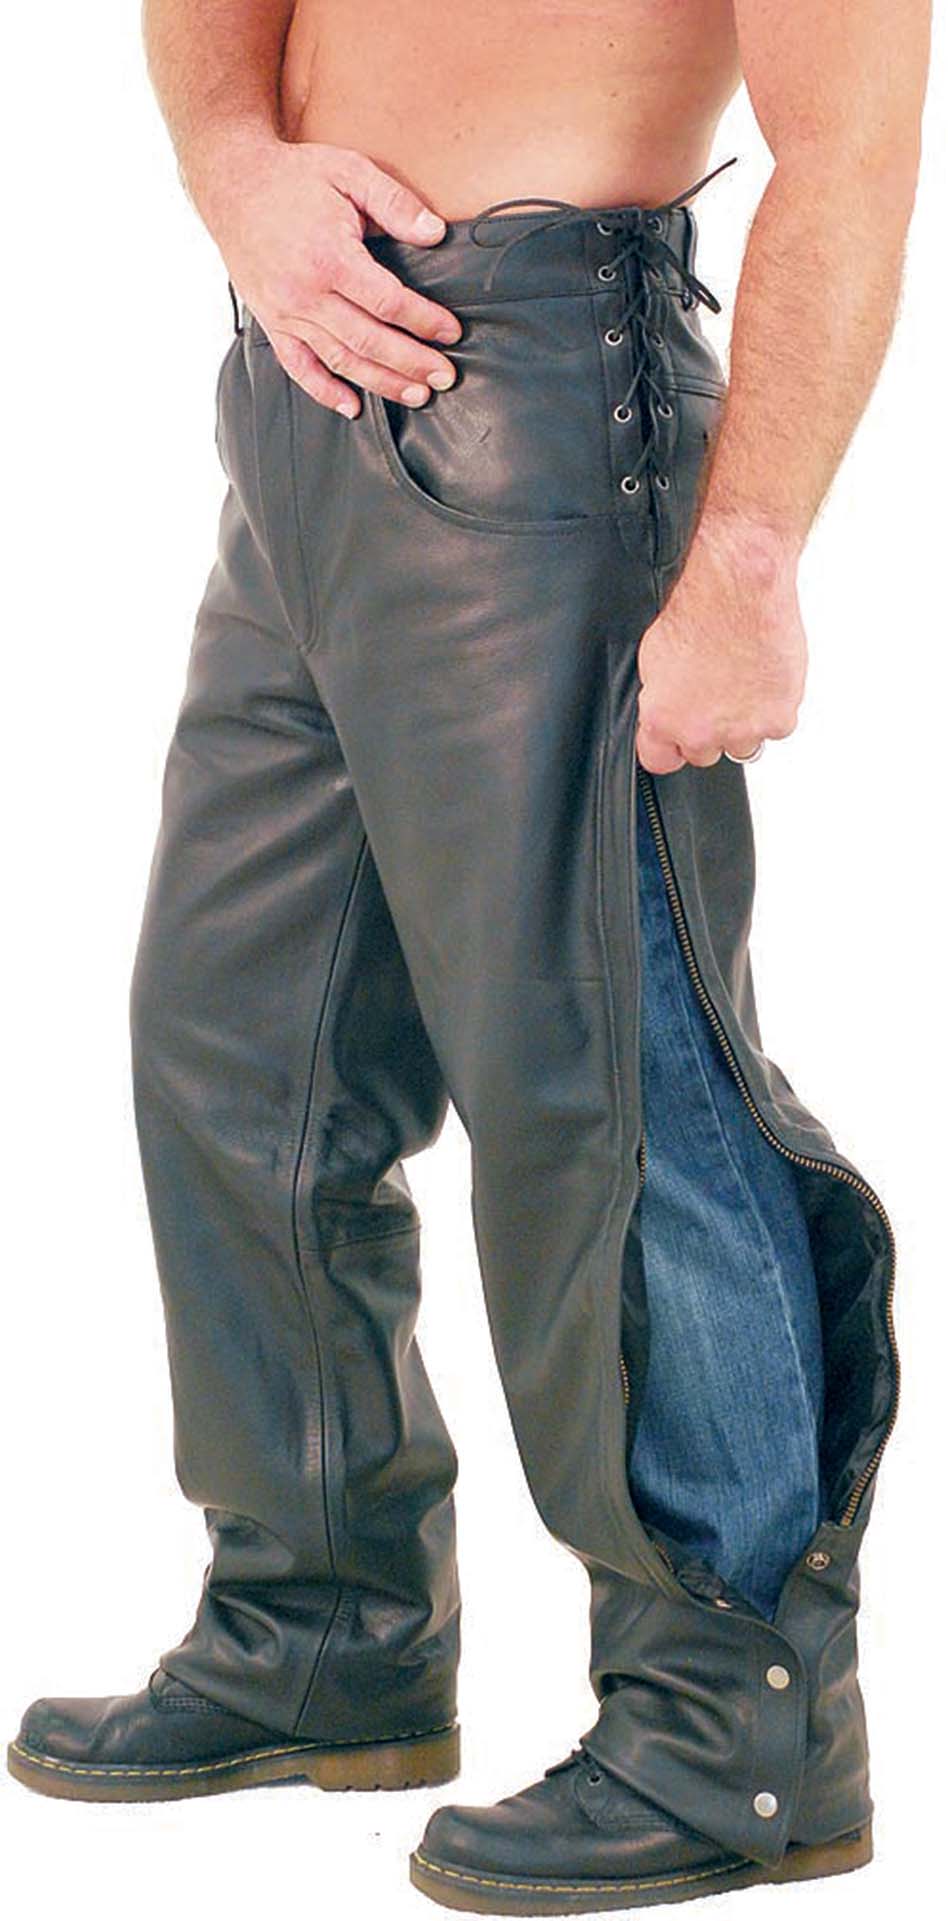 Biker wearing motorcycle overpants with zip sides and lacing